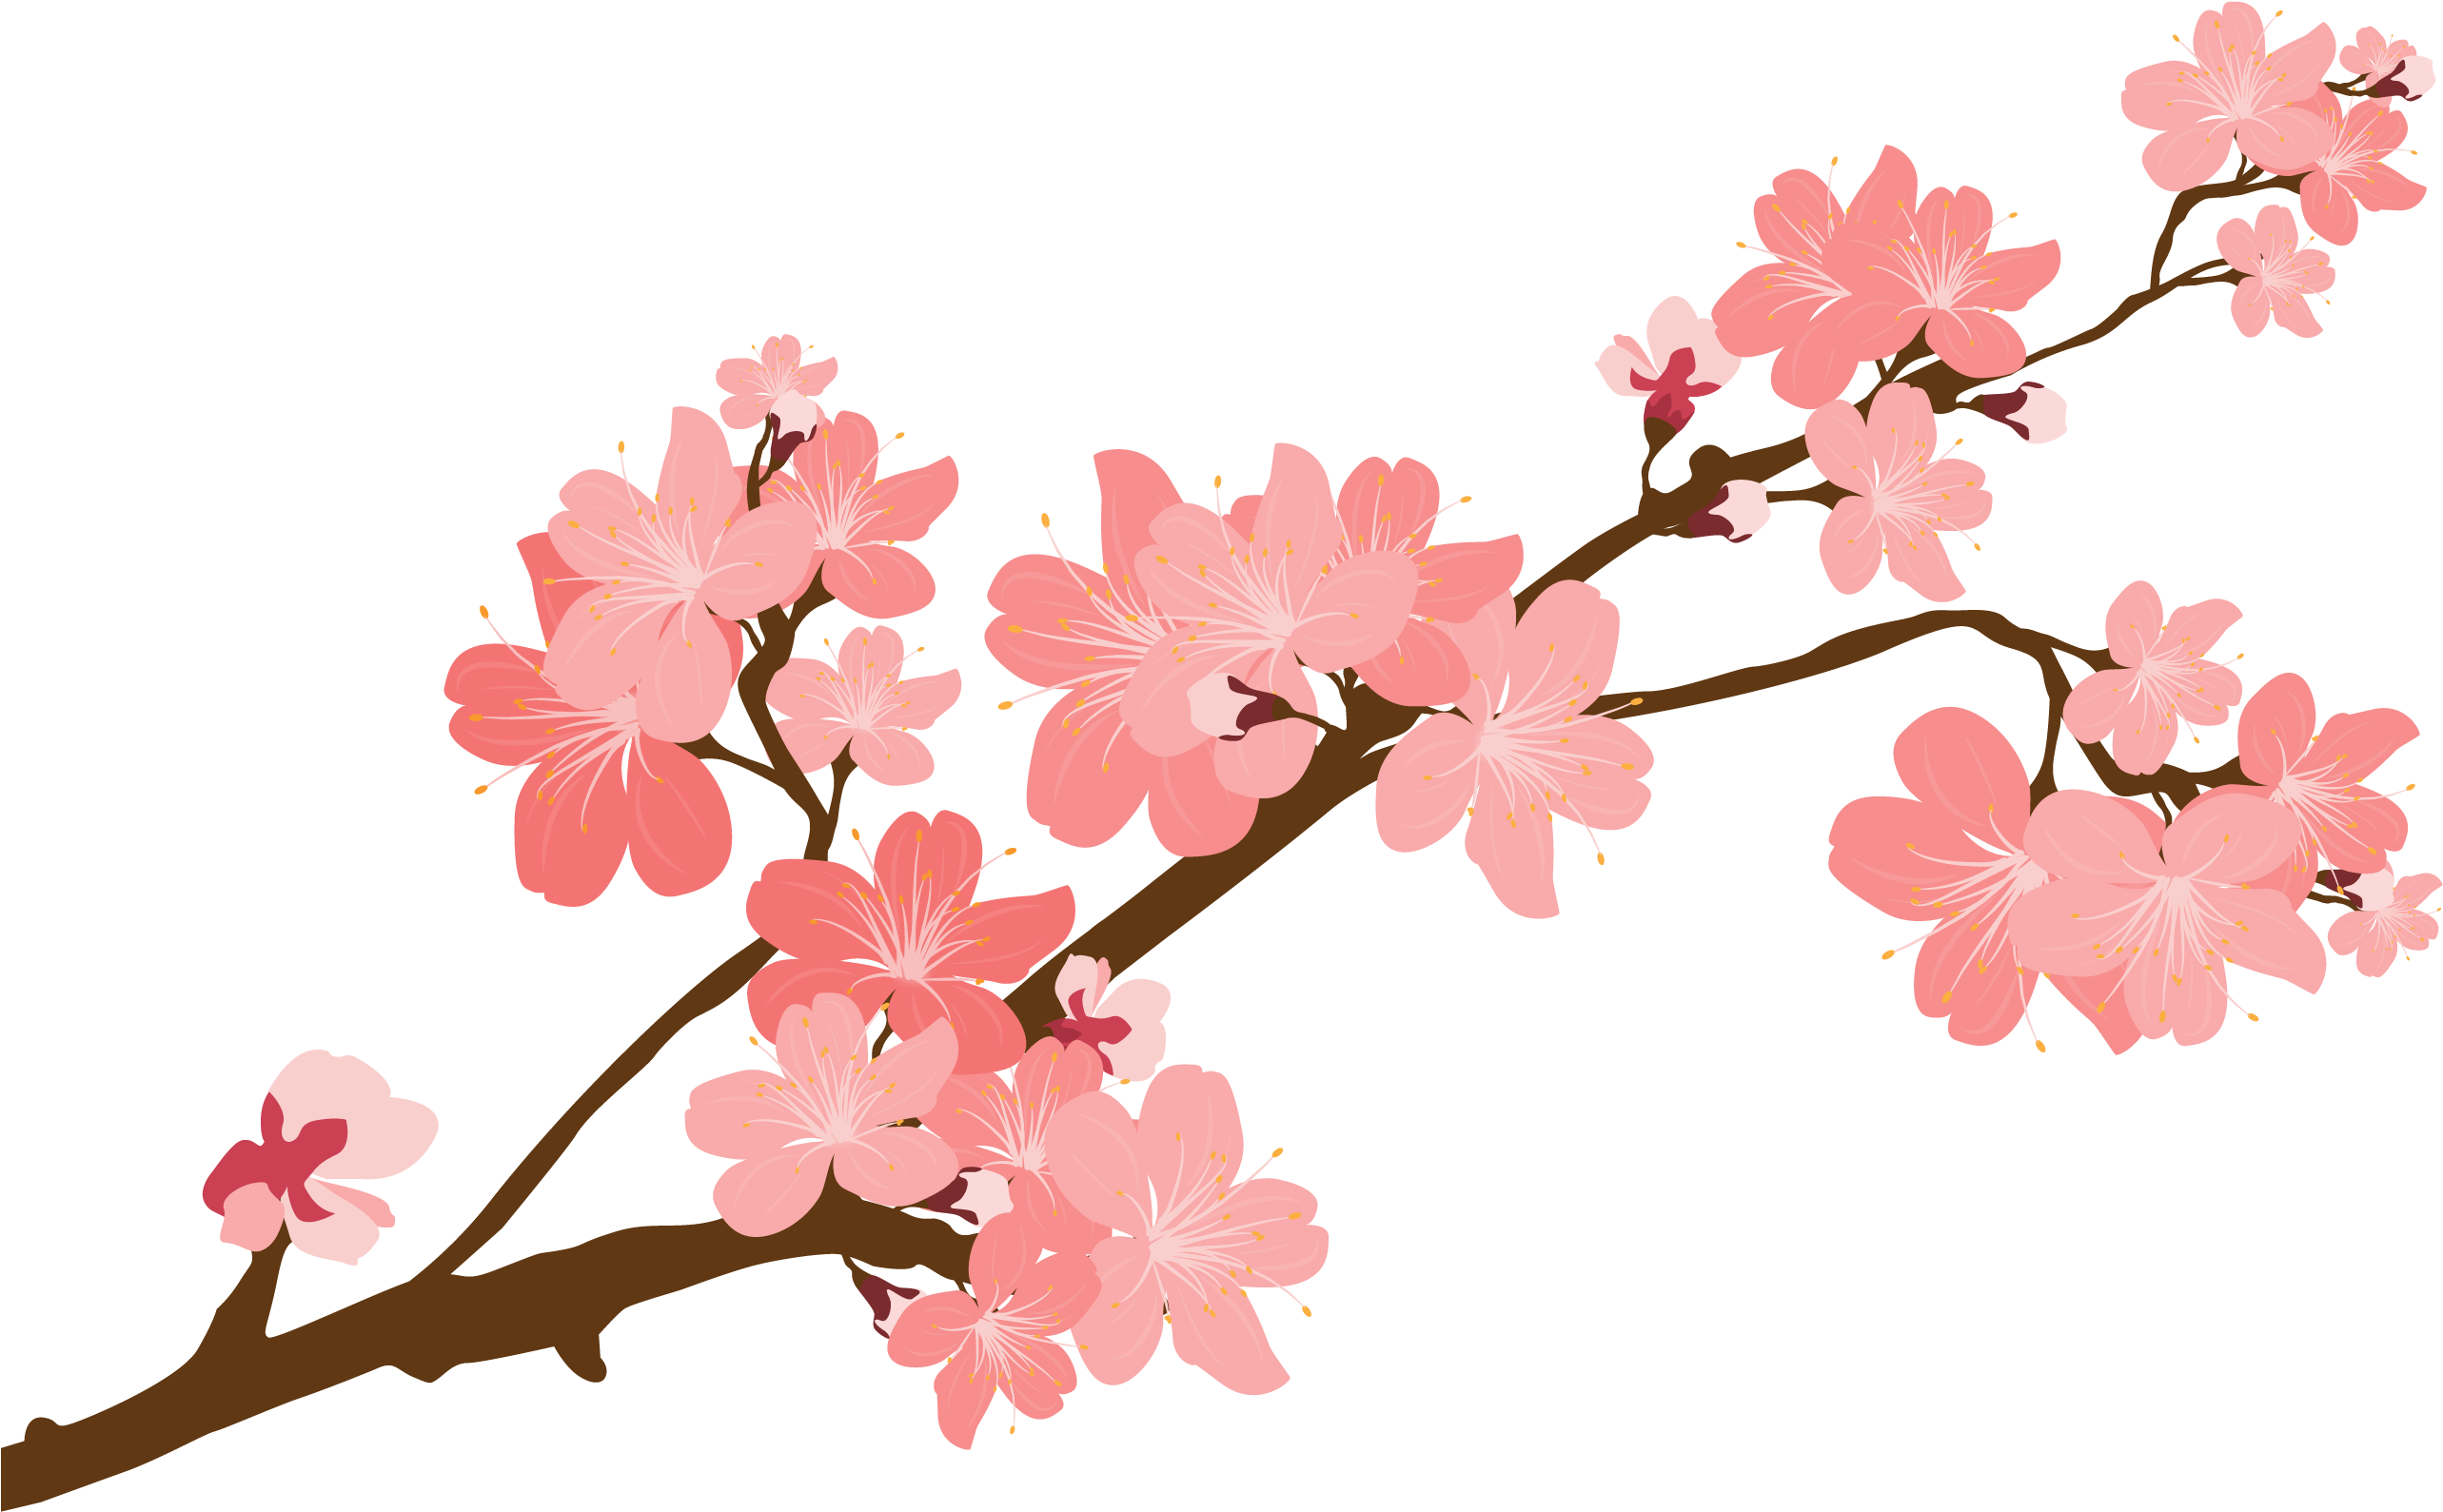 Blossom Flower Vector PNG Image High Quality PNG Image